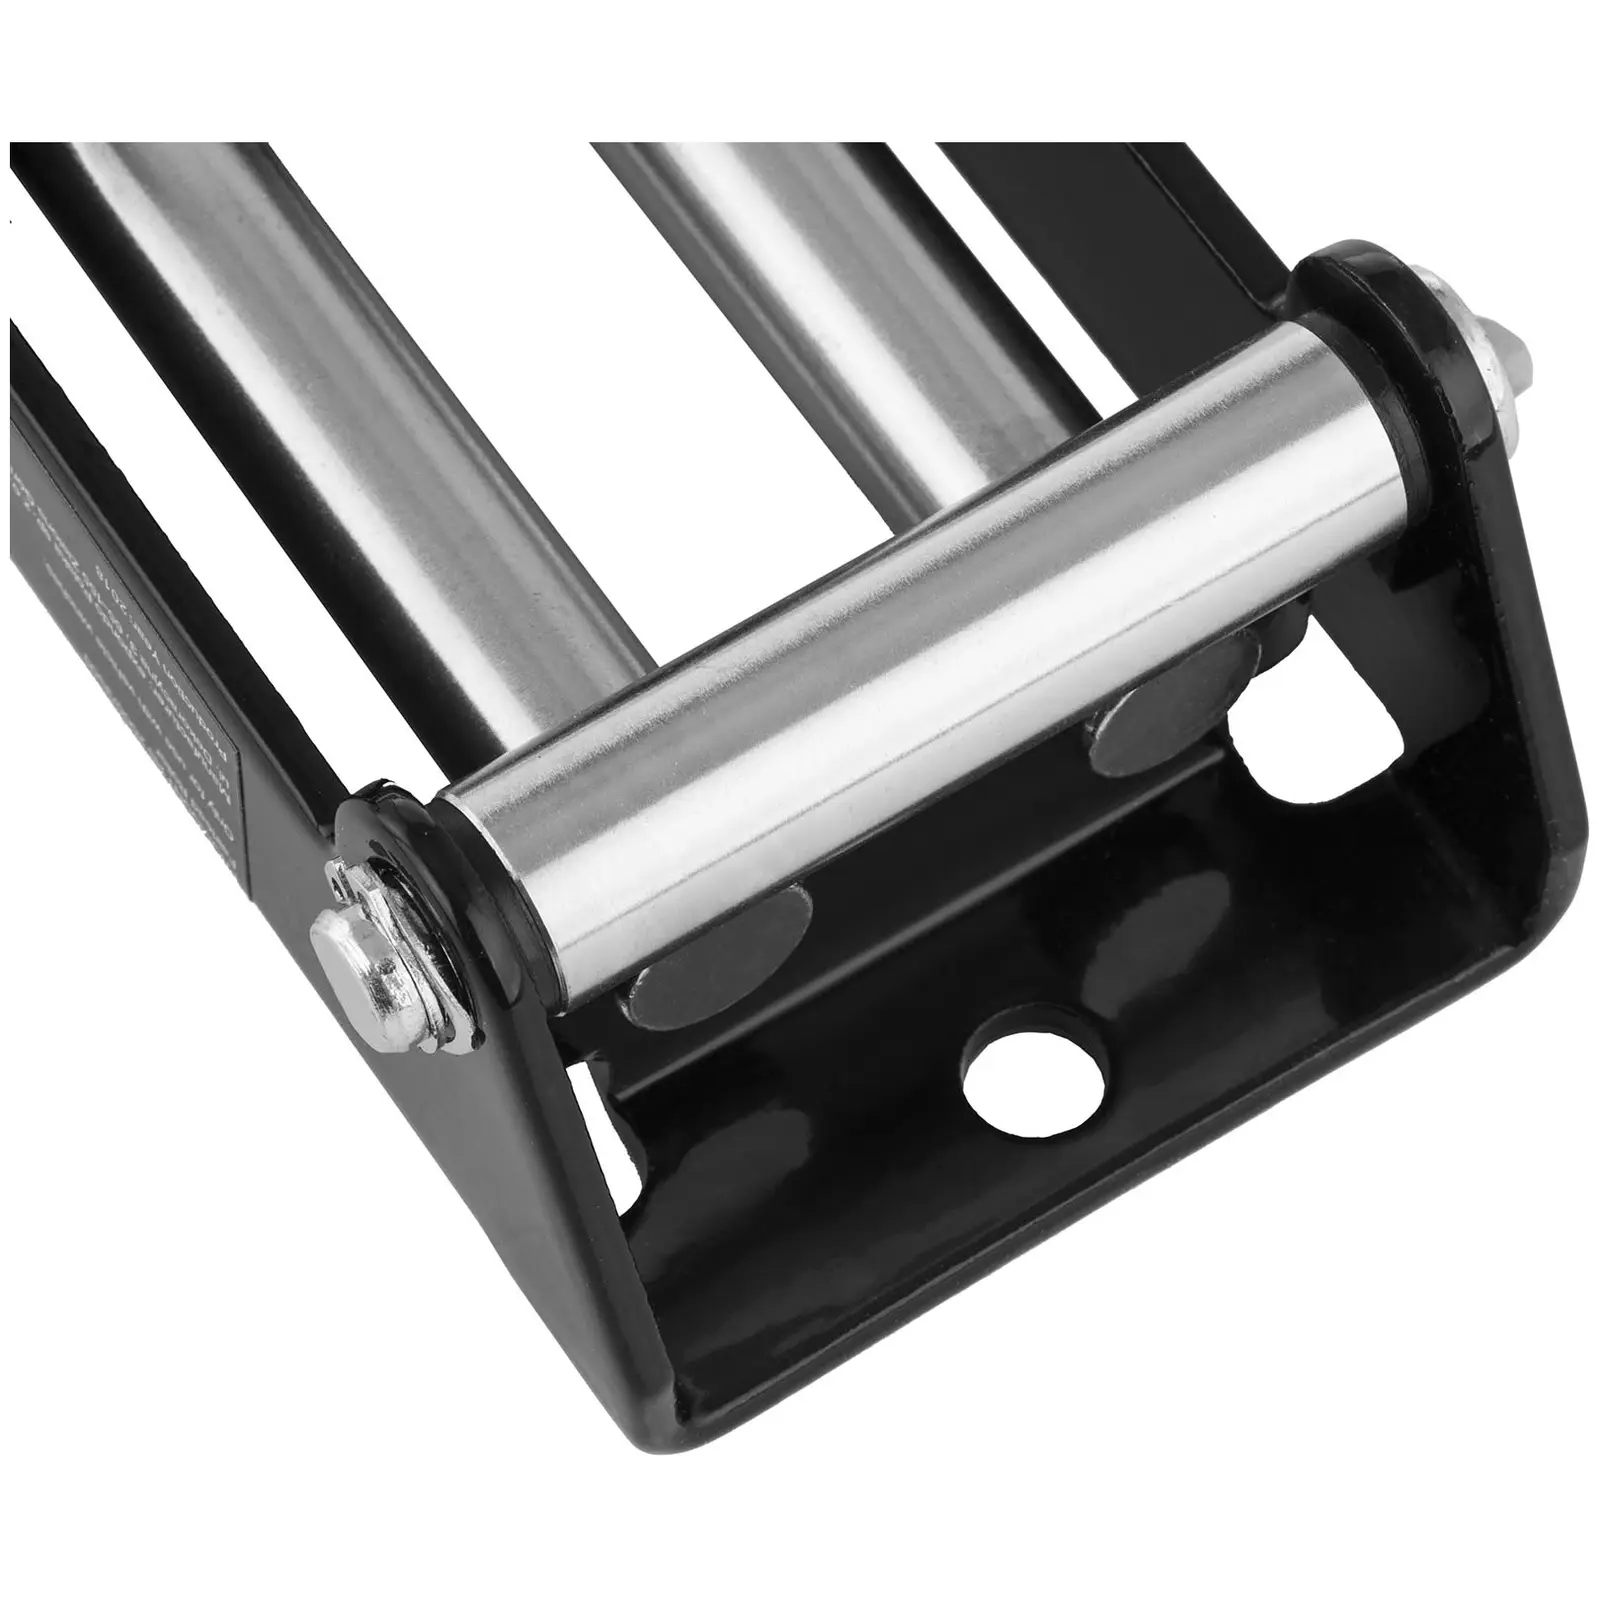 Fairlead Roller - 4 Rolls - up to 3.500 lbs/1.590 kg